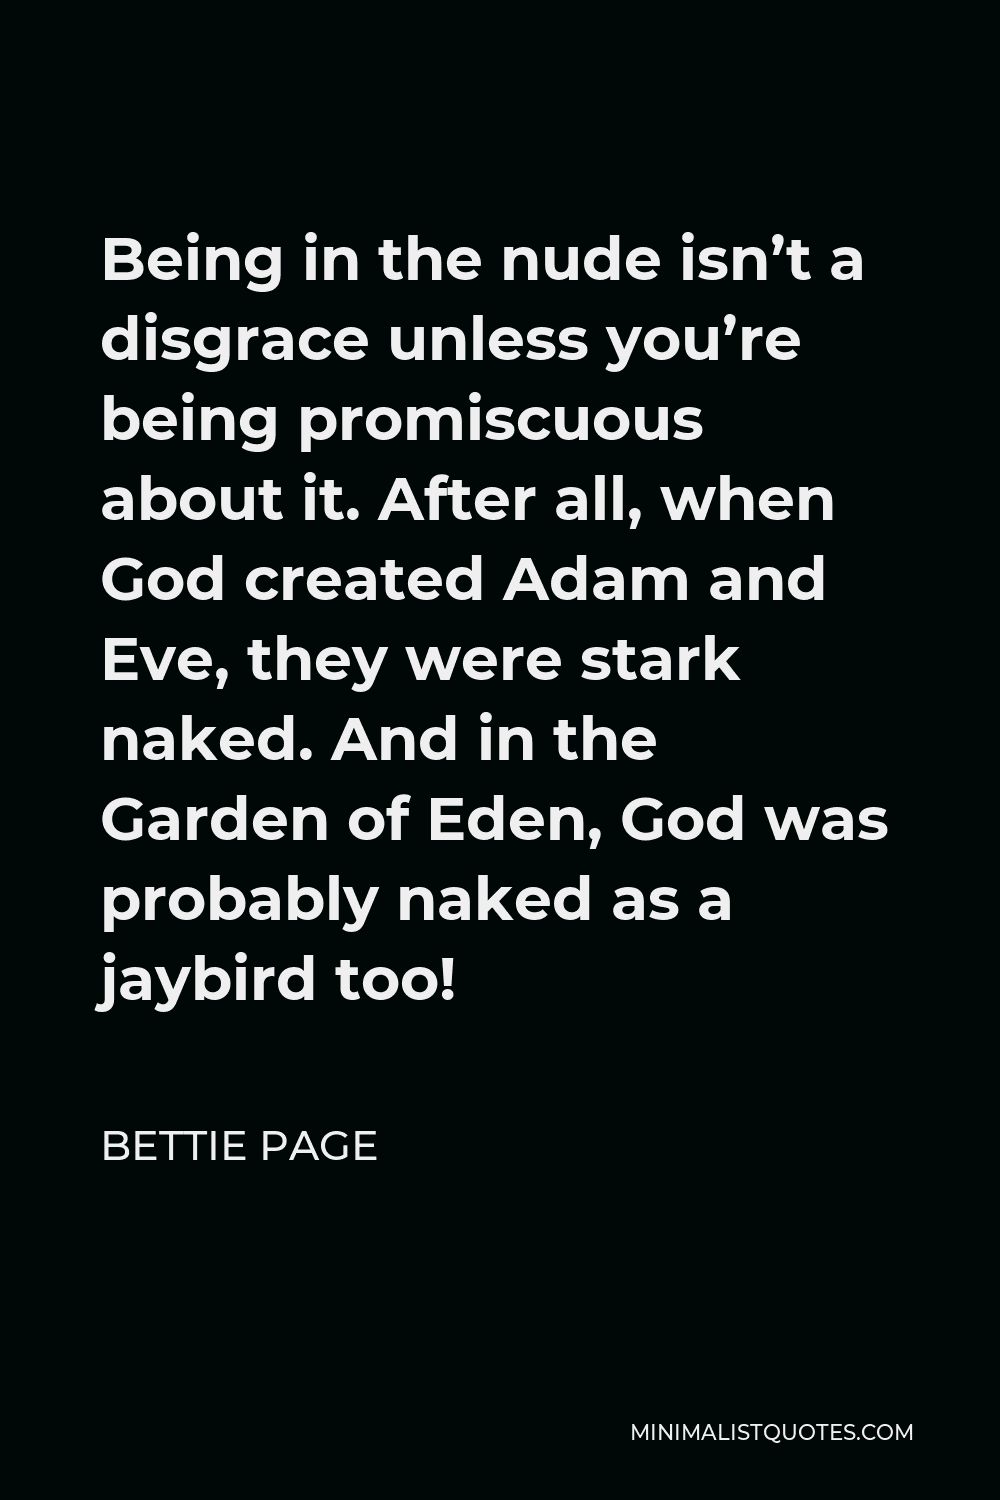 Bettie Page Quote - Being in the nude isn’t a disgrace unless you’re being promiscuous about it. After all, when God created Adam and Eve, they were stark naked. And in the Garden of Eden, God was probably naked as a jaybird too!